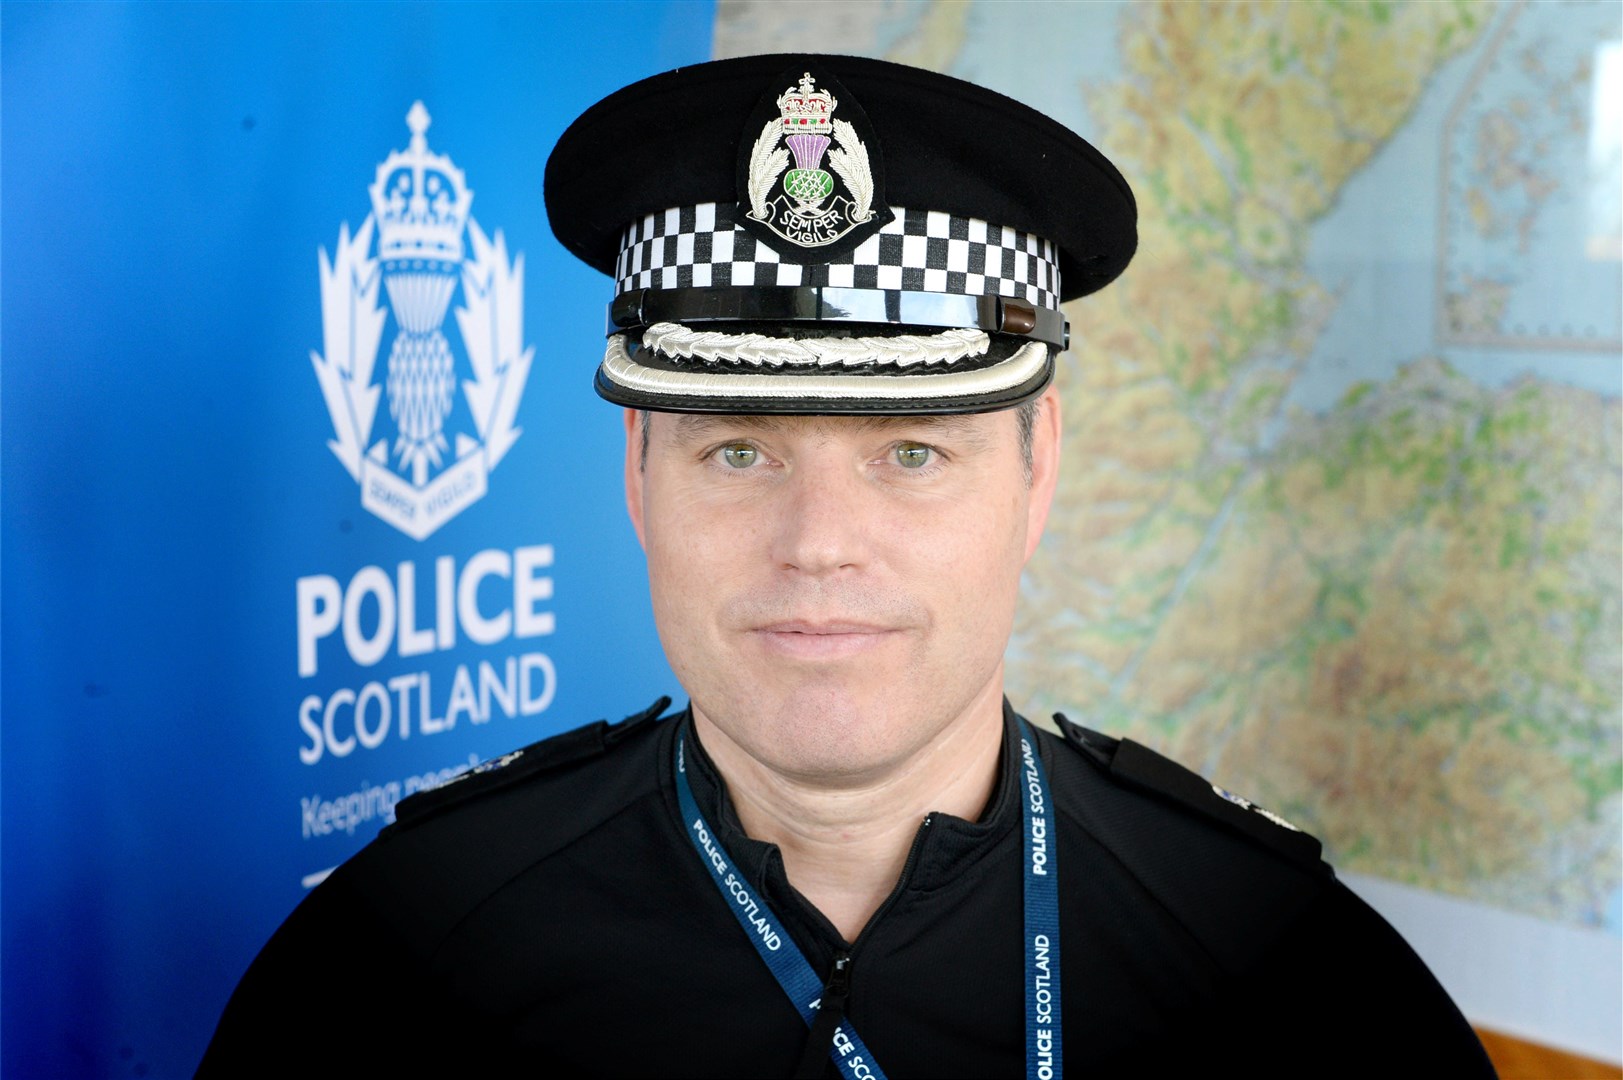 Chief Supt Conrad Trickett: 'I would urge anyone with any concerns or worries to please speak to our officers who are there to help'.